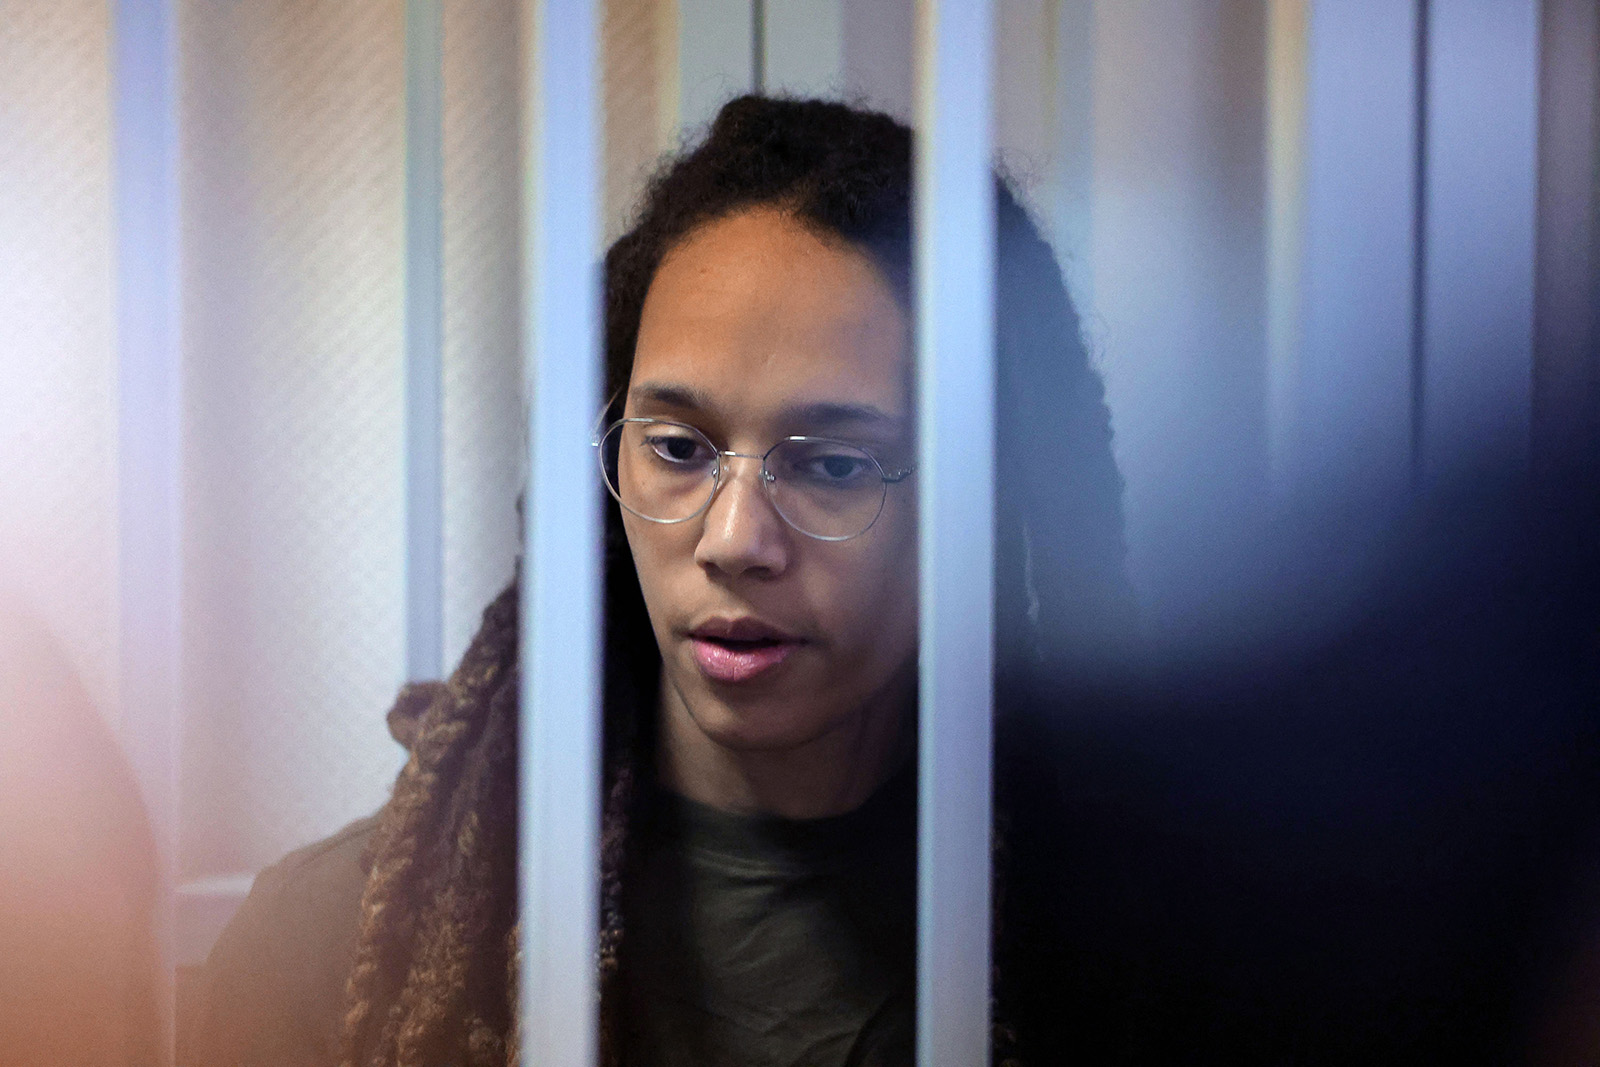 US basketball player Brittney Griner stands in a defendants' cage before a court hearing during her trial on charges of drug smuggling, in Khimki, outside Moscow, Russia, on August 2.